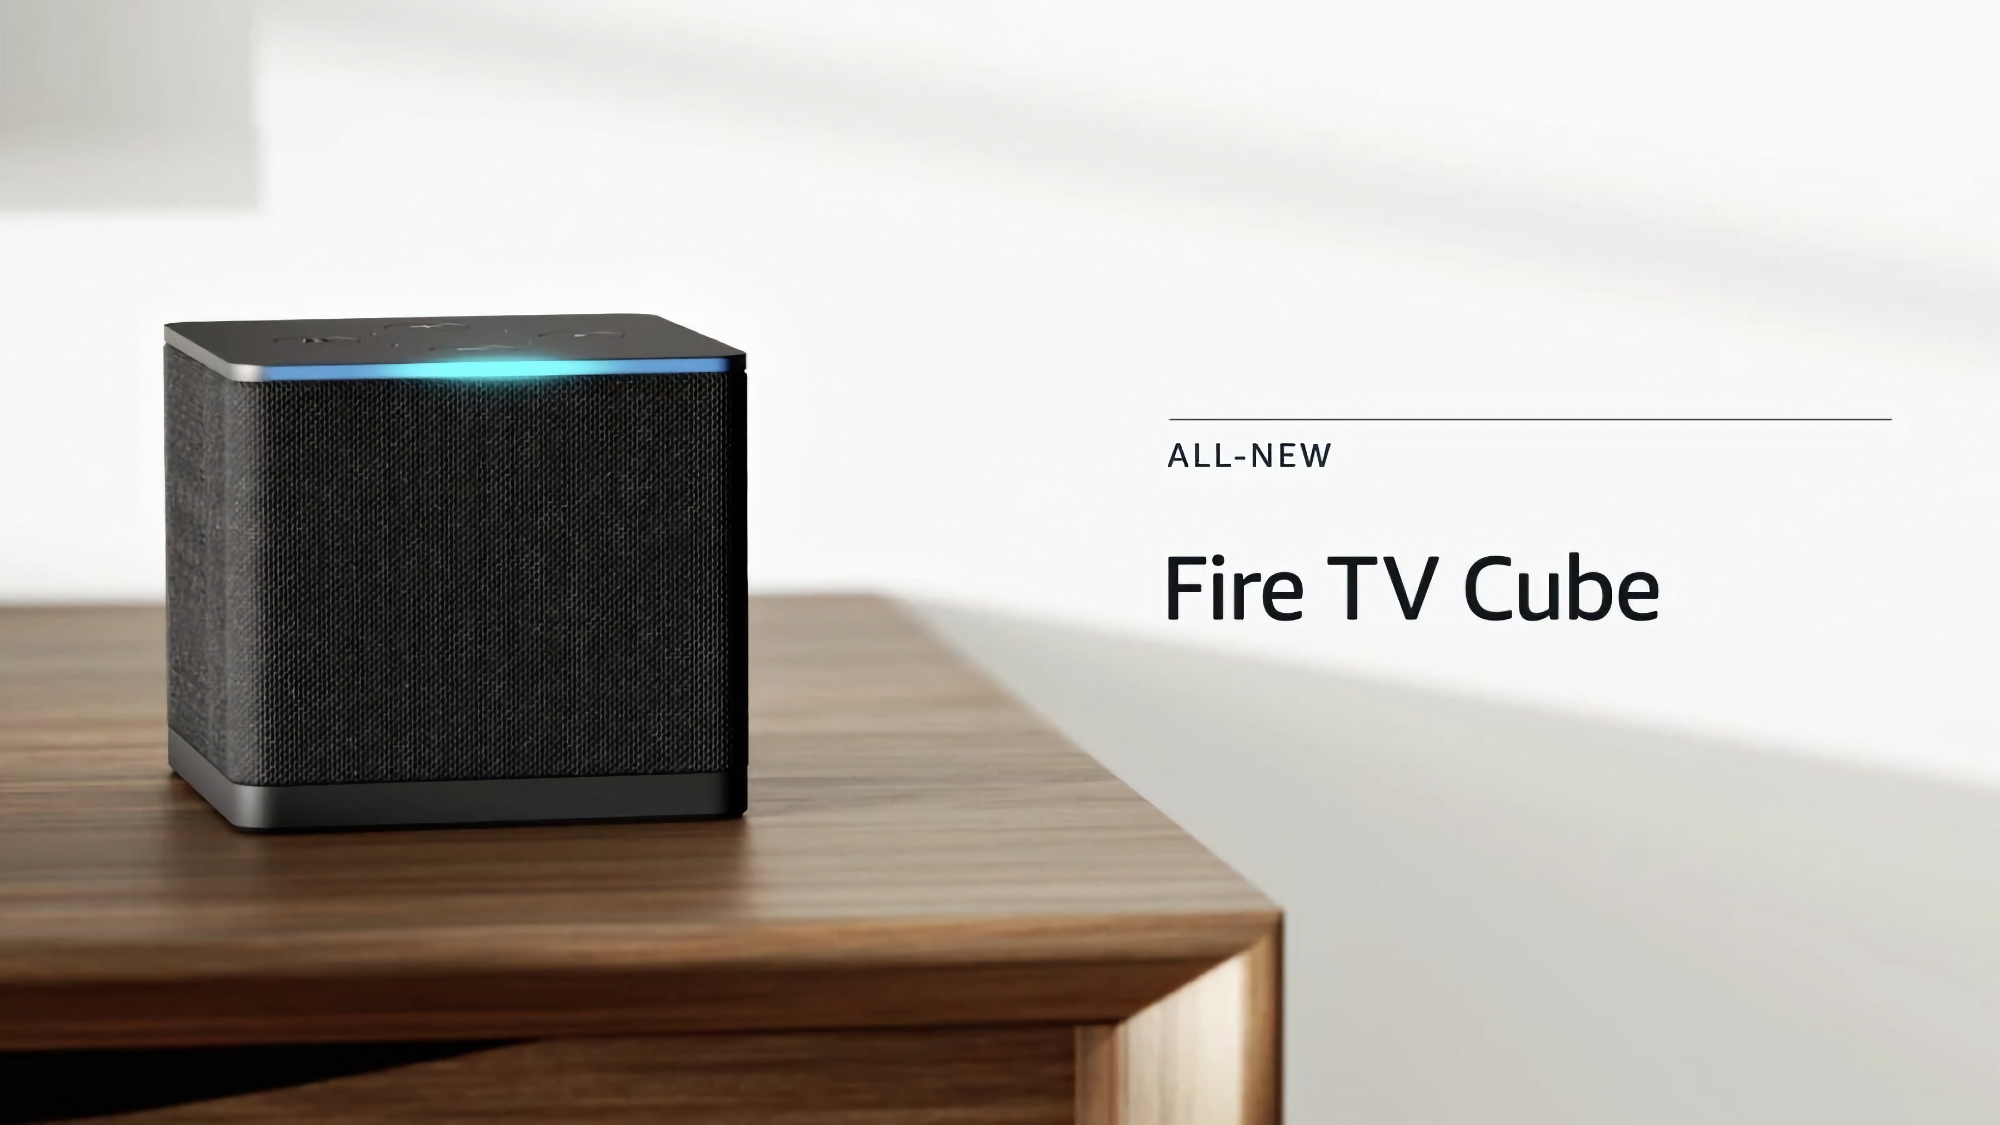 Amazon Fire TV Cube: 4K media player with Alexa and Wi-Fi 6E for $124 ($15 off)